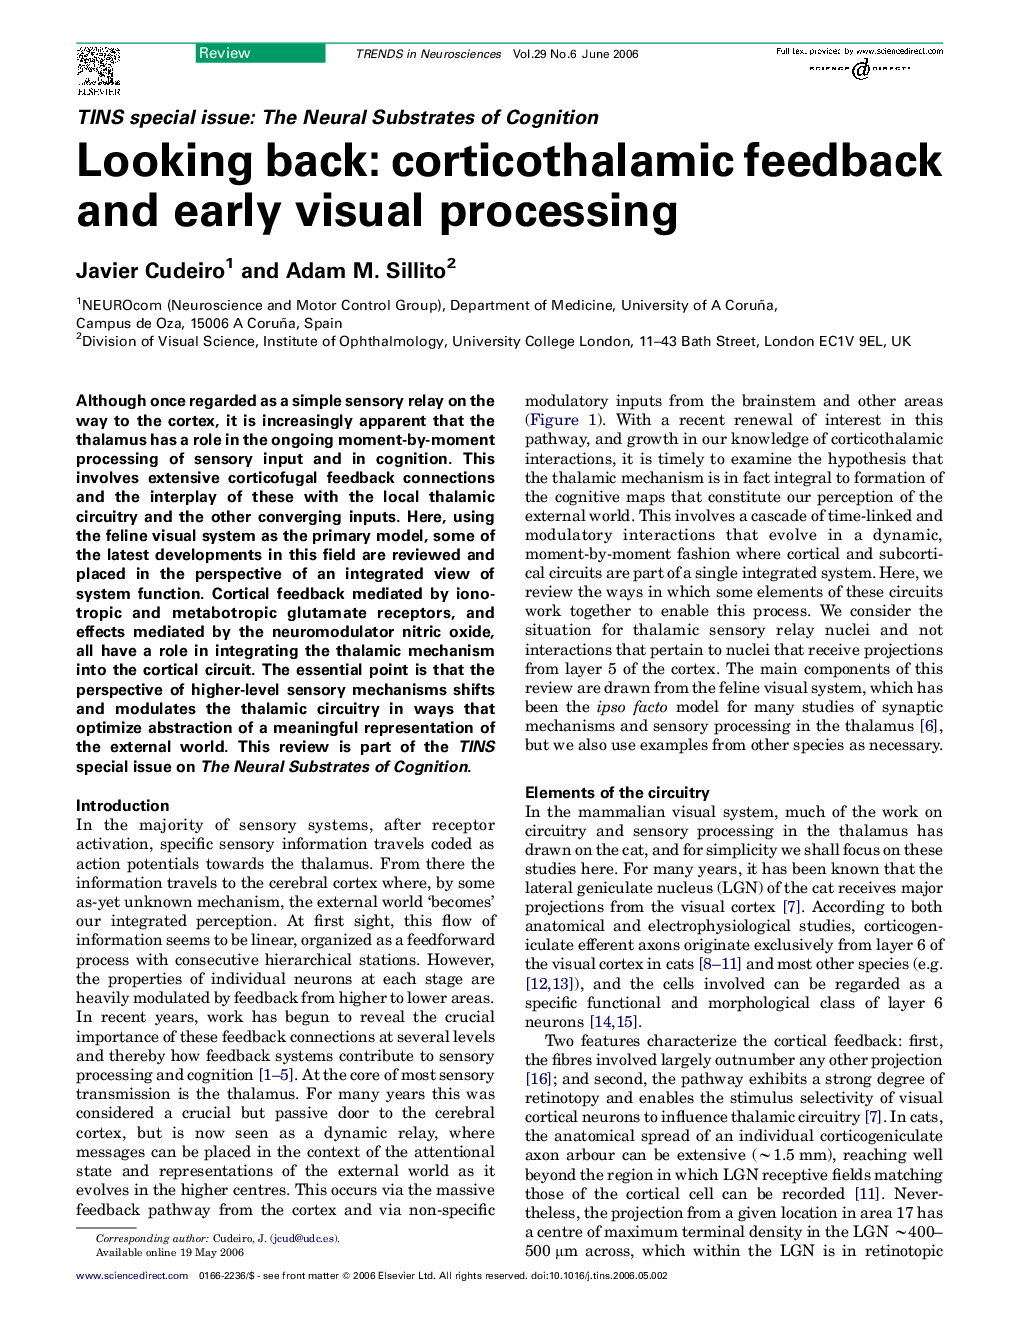 Looking back: corticothalamic feedback and early visual processing